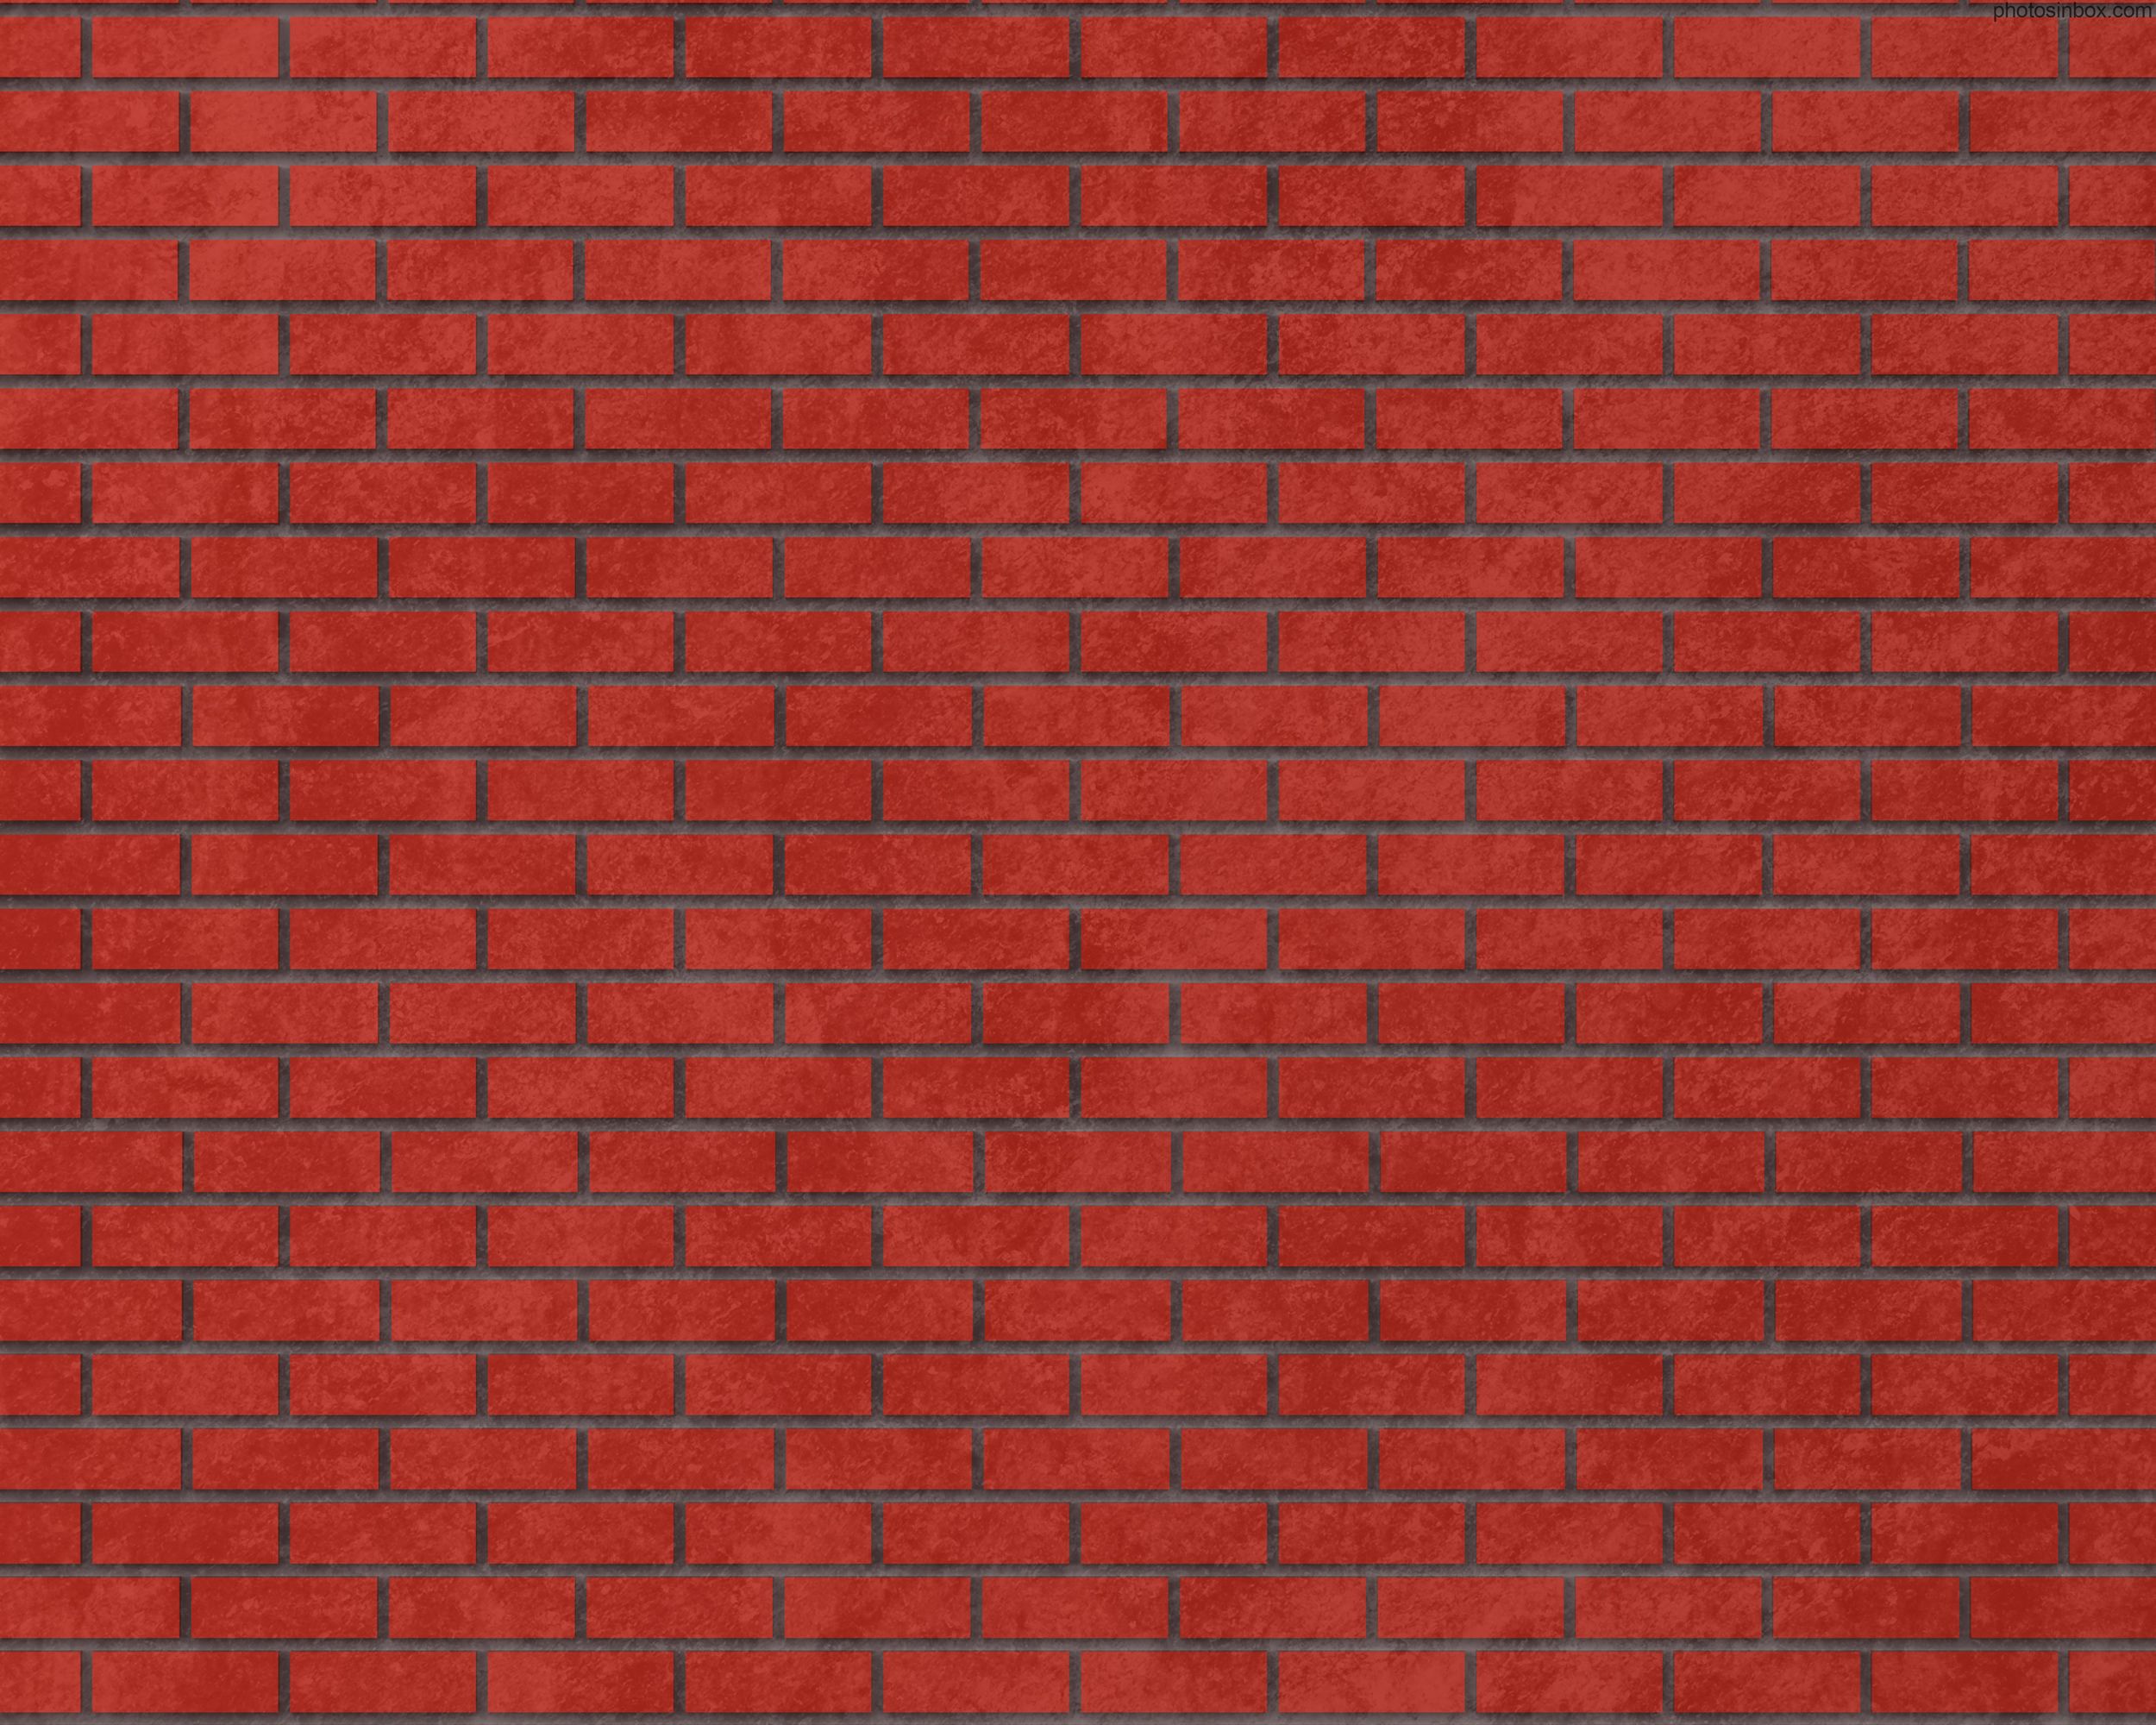 Download texture: red brick wall, texture, red bricks, brick wall texture, background, download. Brick wall, Brick wall texture, Brick texture